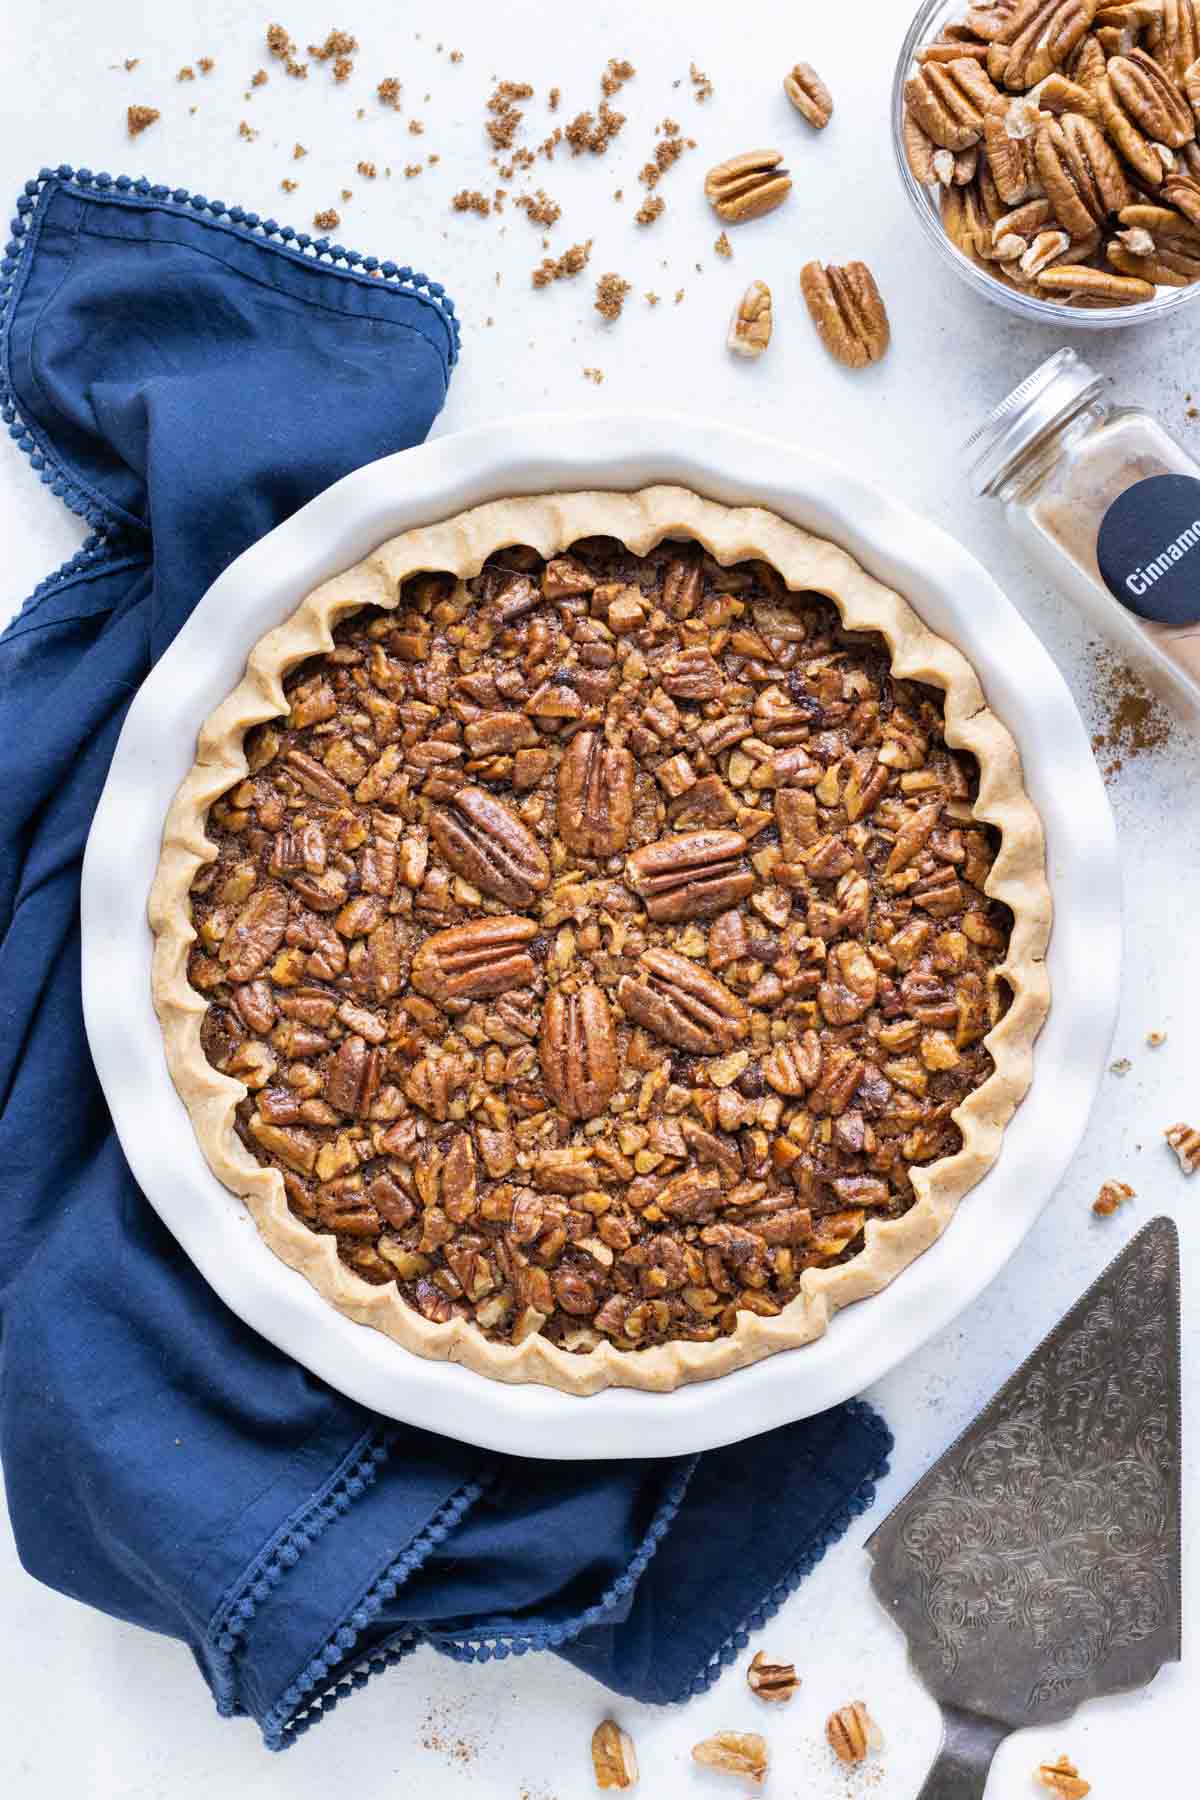 A whole pecan pie has a perfectly golden crust.